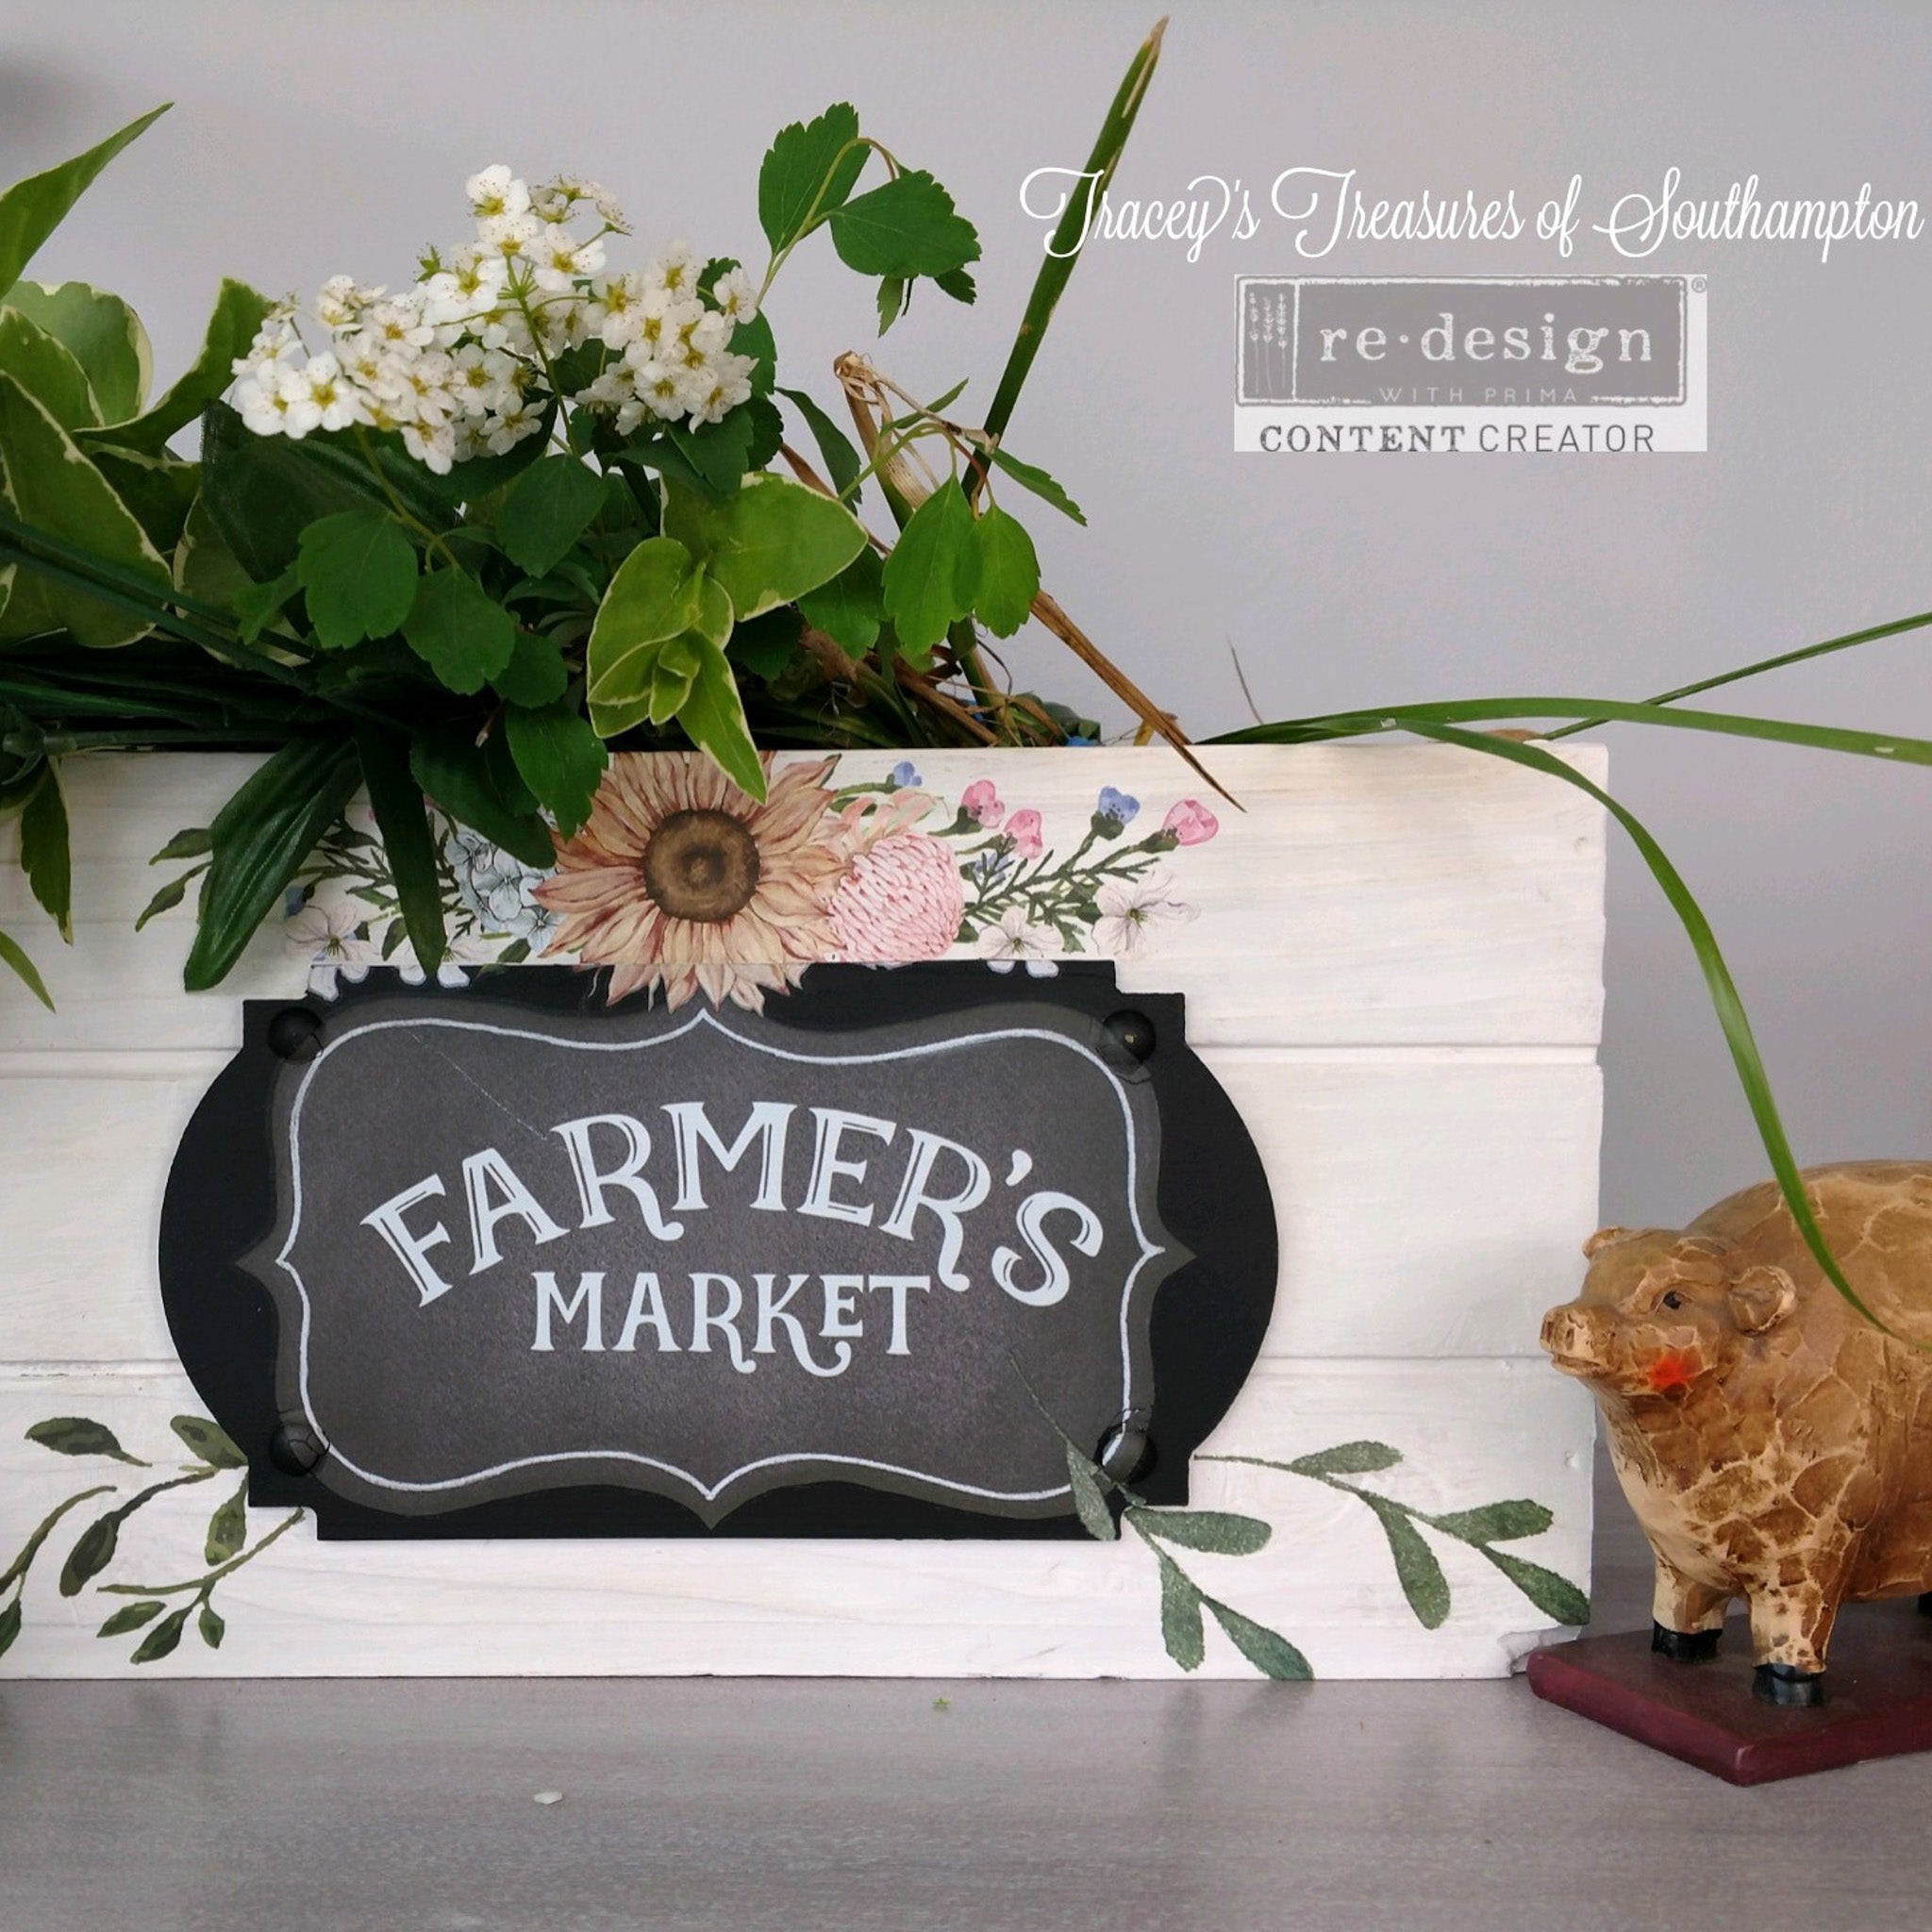 A wood box turned into a flower container refurbished by Tracey's Treasuresof Southampton is painted white and features ReDesign with Prima's Morning Farmhouse small transfer on it.